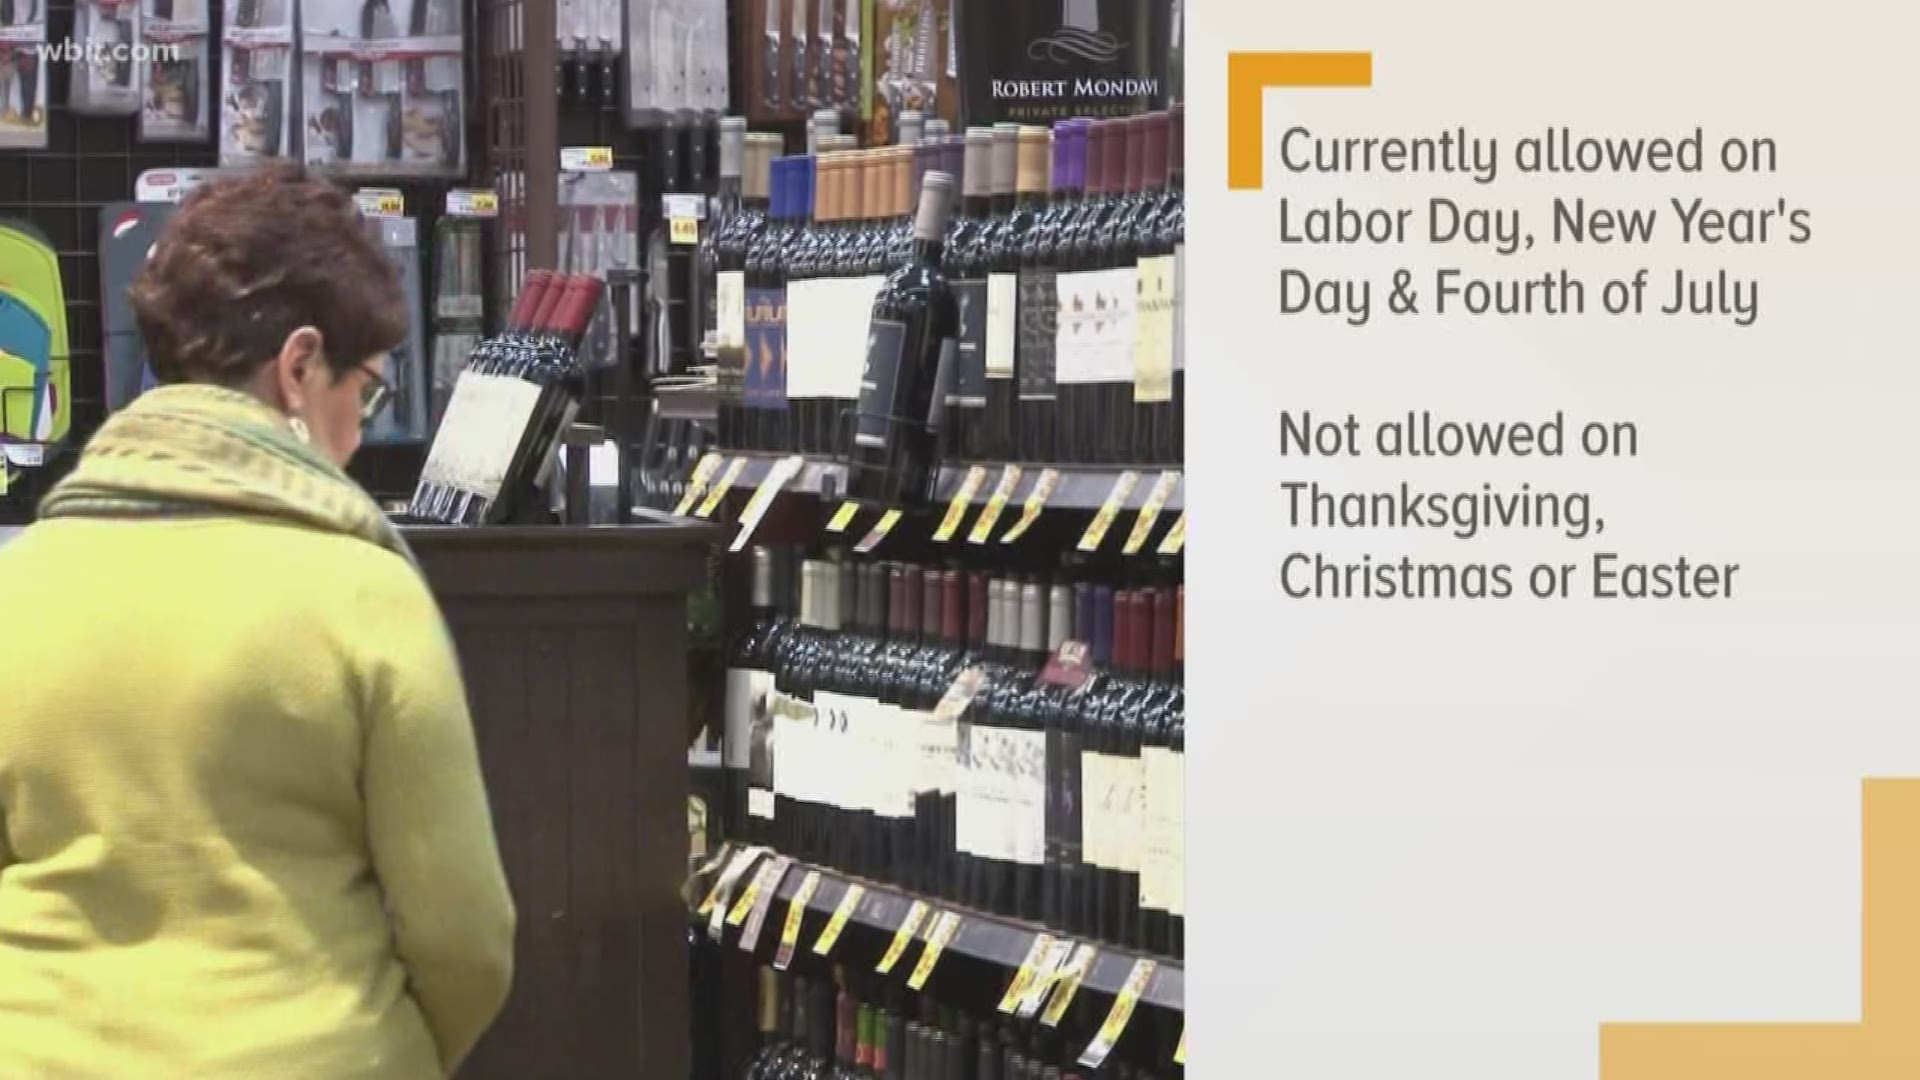 Right now, people can buy alcohol on Labor Day, New Year's and the Fourth of July in Tennessee.